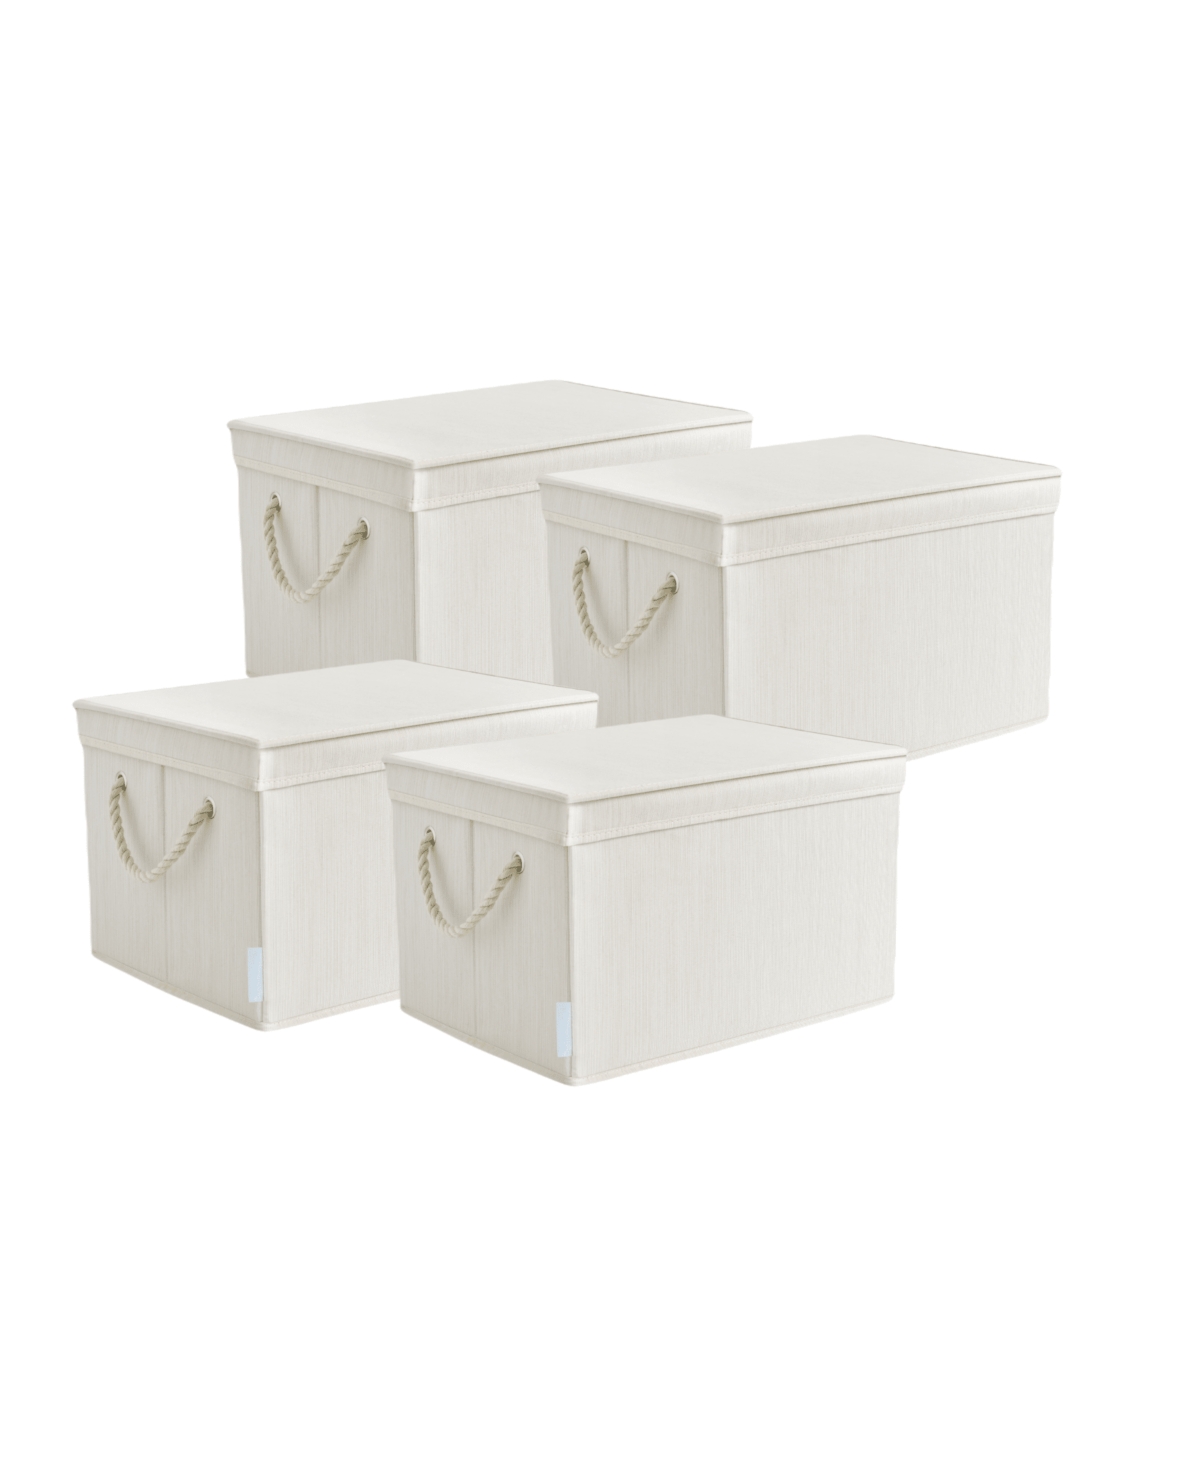 Wethinkstorage 34 Litre Collapsible Fabric Storage Bins With Lids And Cotton Rope Handles, Set Of 4 In Ivory